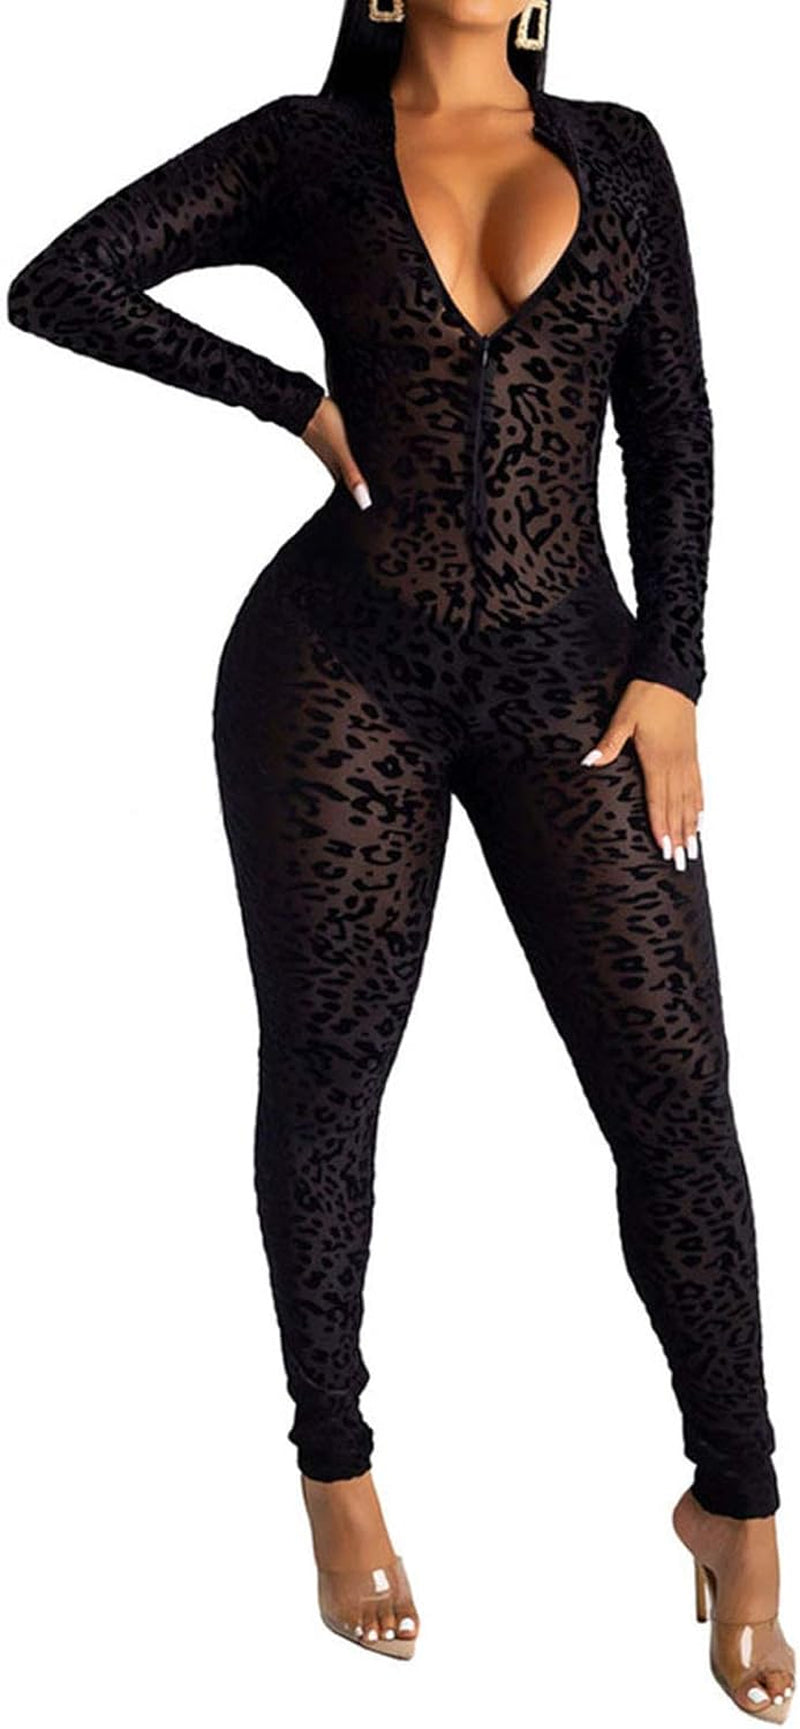 Women See through Bodycon Jumpsuit - One Piece Deep V Neck Outfits Sheer Mesh Leopard Clubwear Jumpsuit Rompers